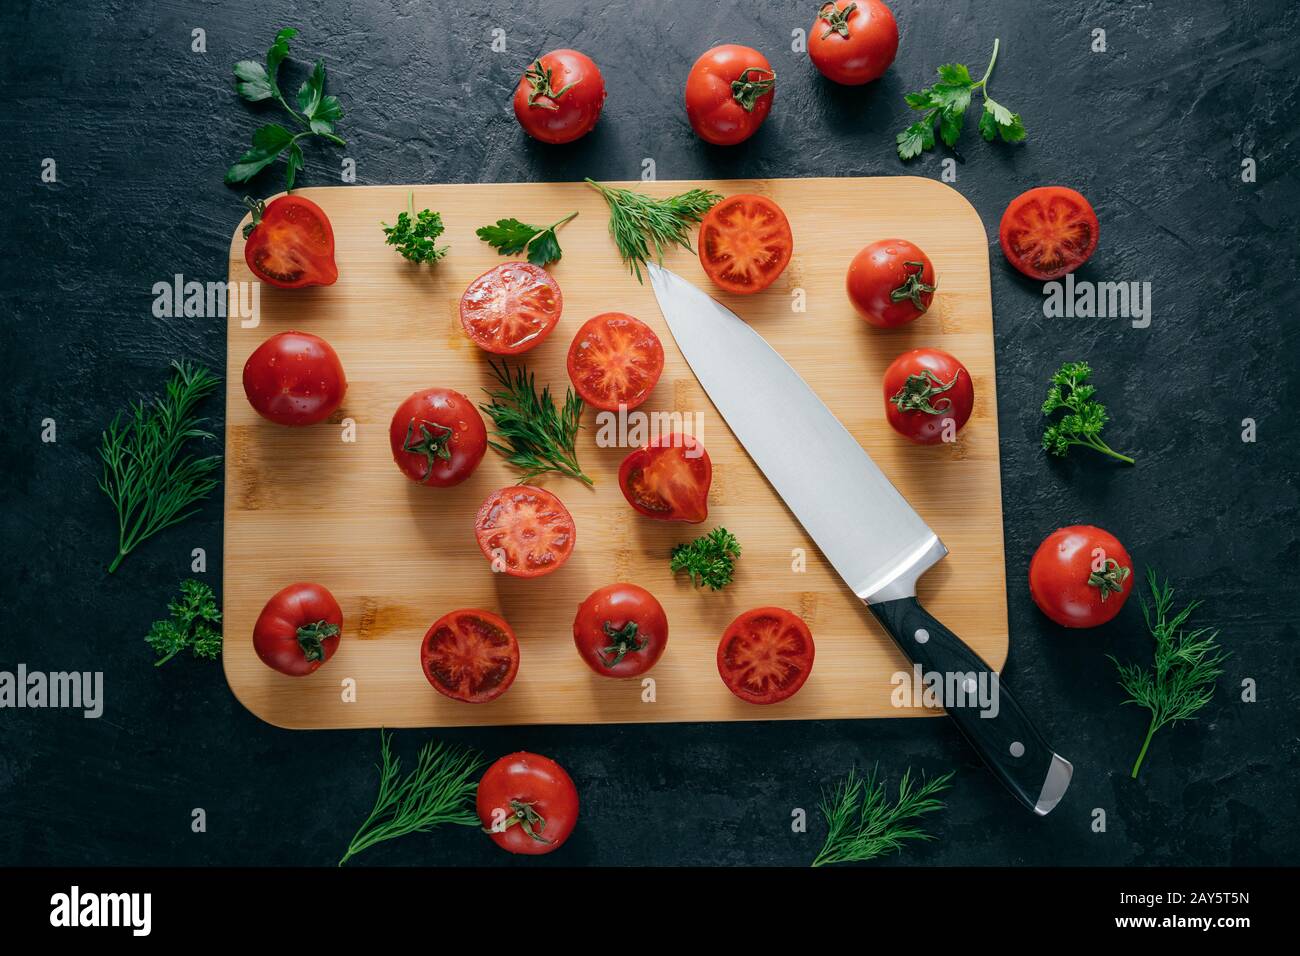 Top view of red sliced tomatoes on wooden chopping board. Sharp knife near. Green parsley and dill. Dark background. Preparing fresh vegetable salad Stock Photo